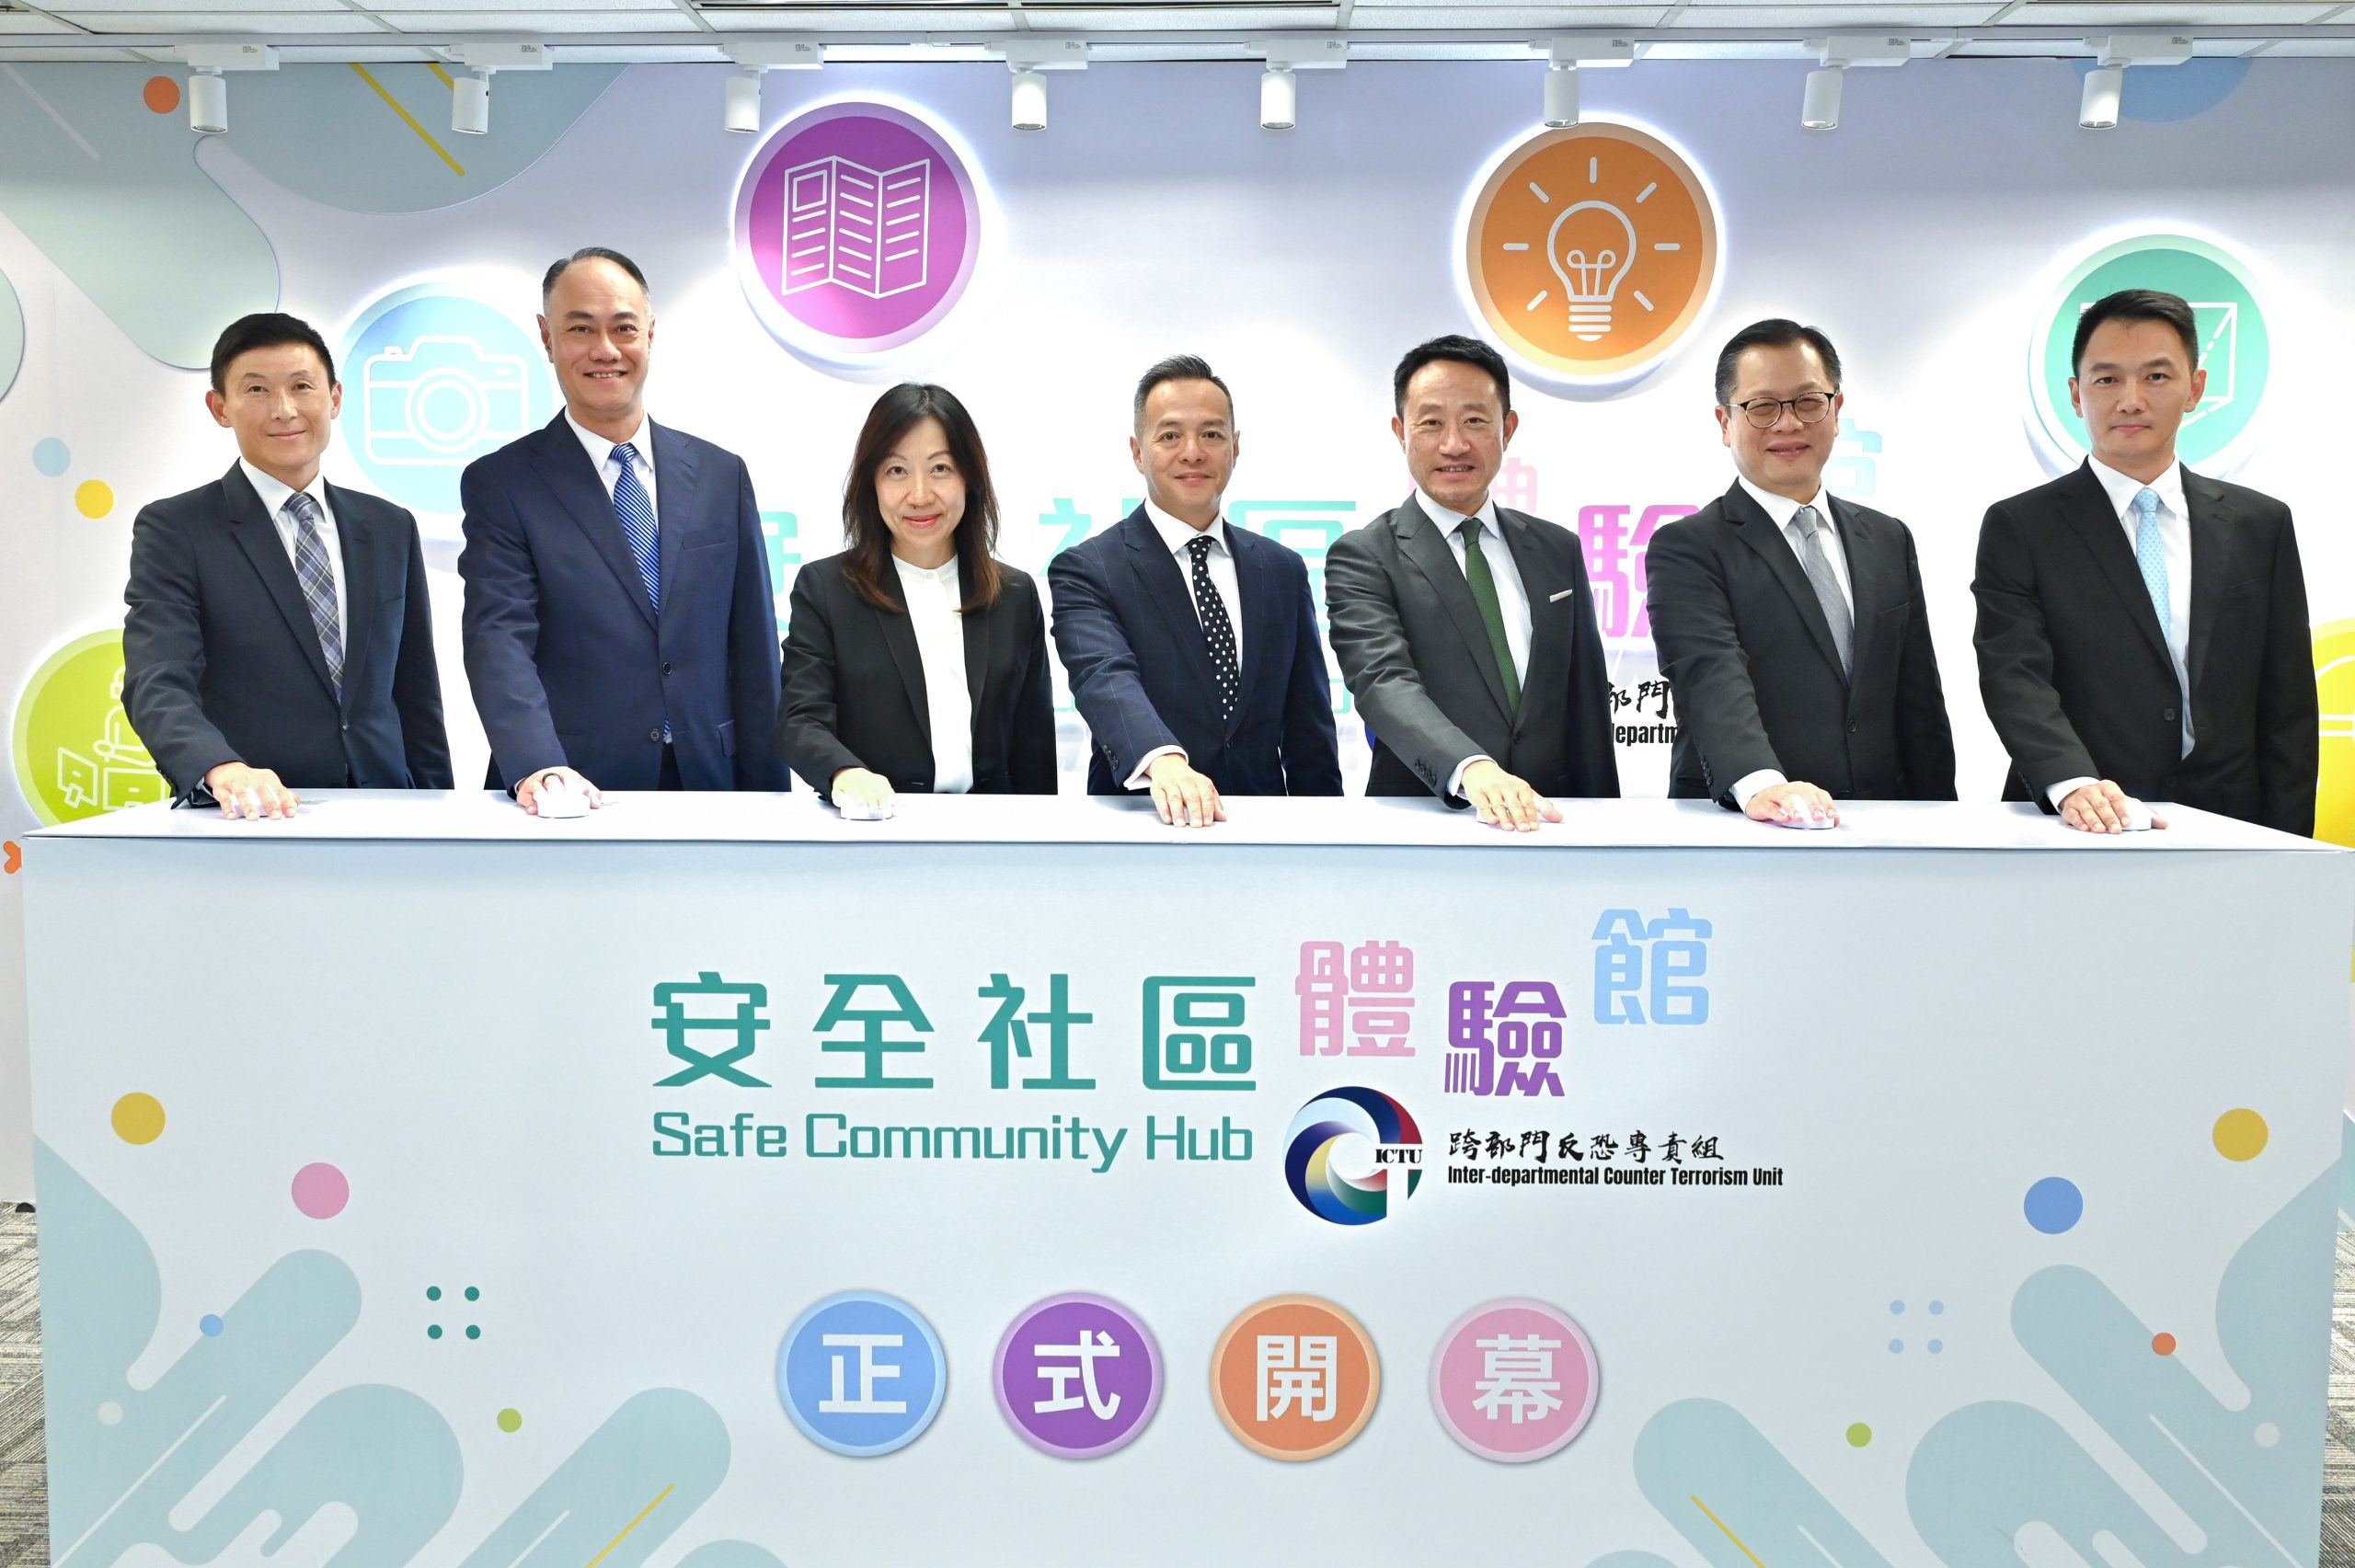 Hong Kong’s first “Safe Community Hub” officially opens